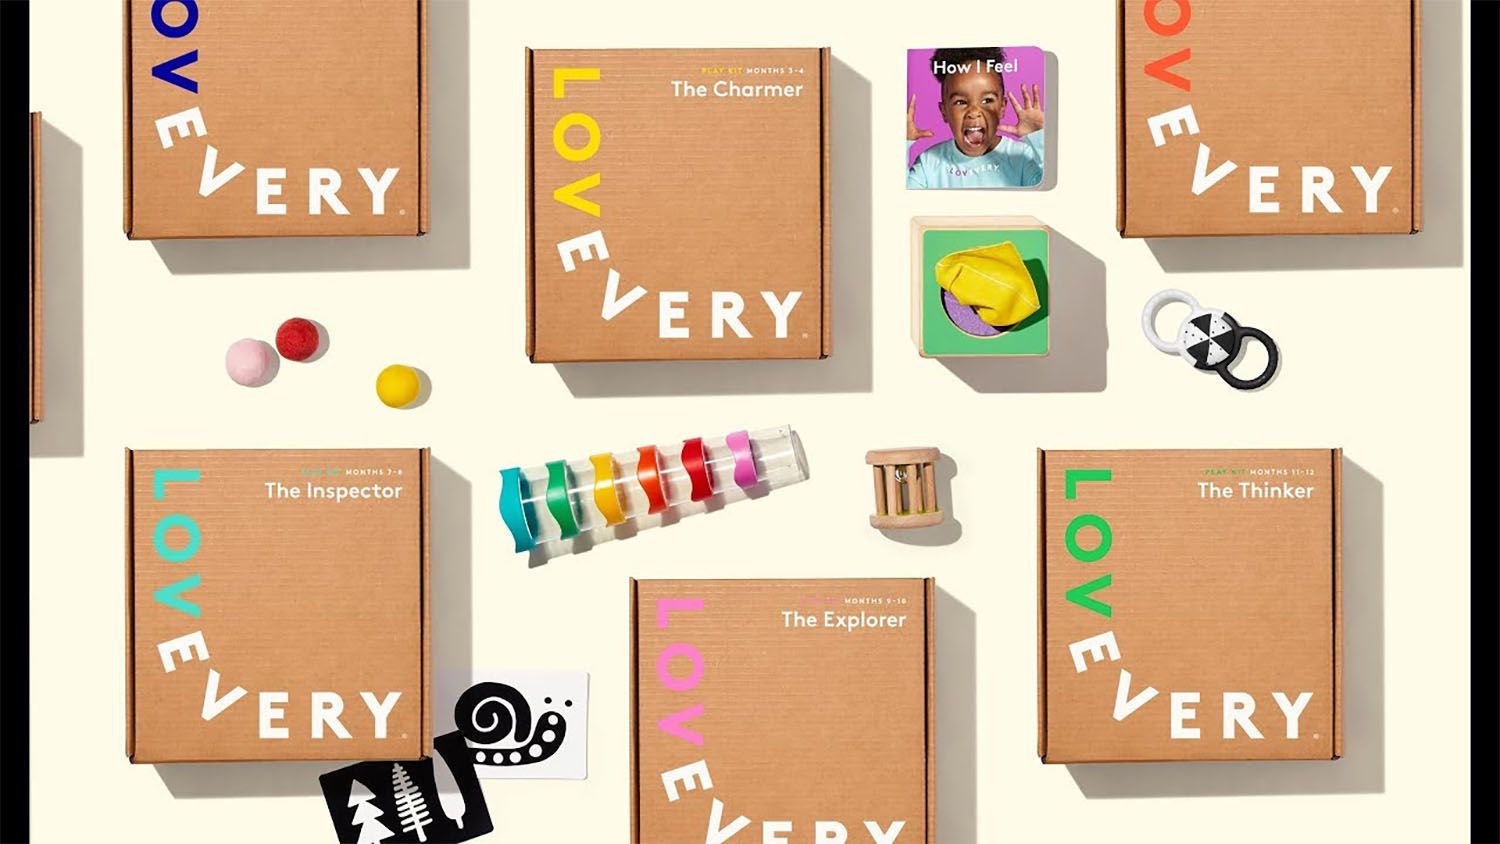 toy subscription service